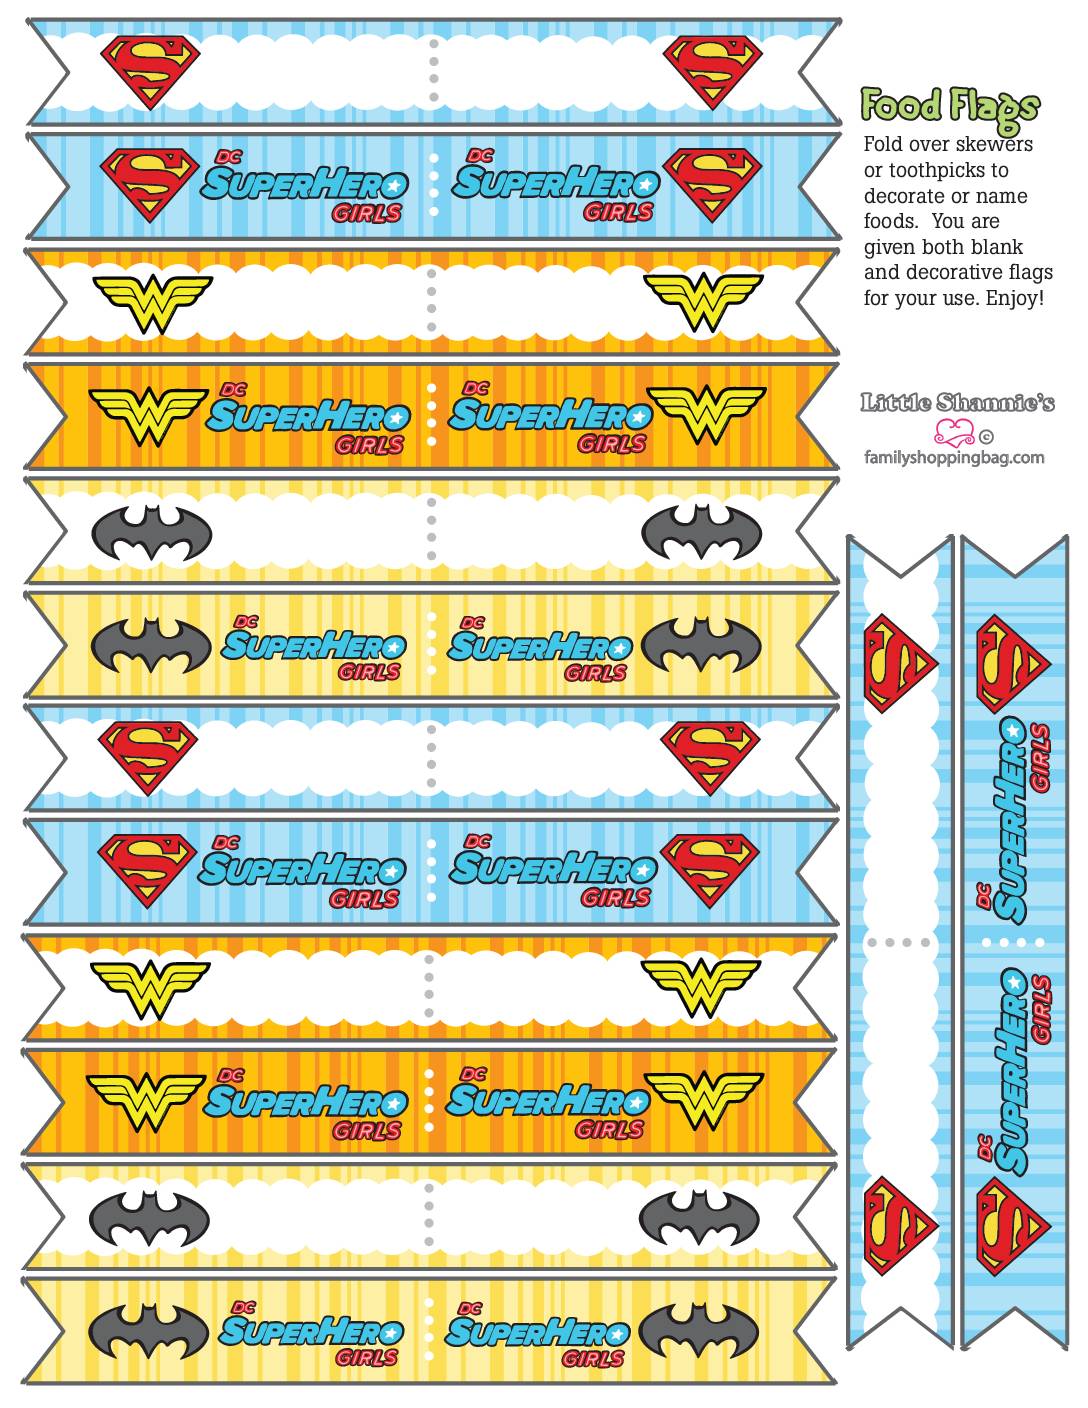 Food Flags DC Super Hero Girls Cupcake Wrappers